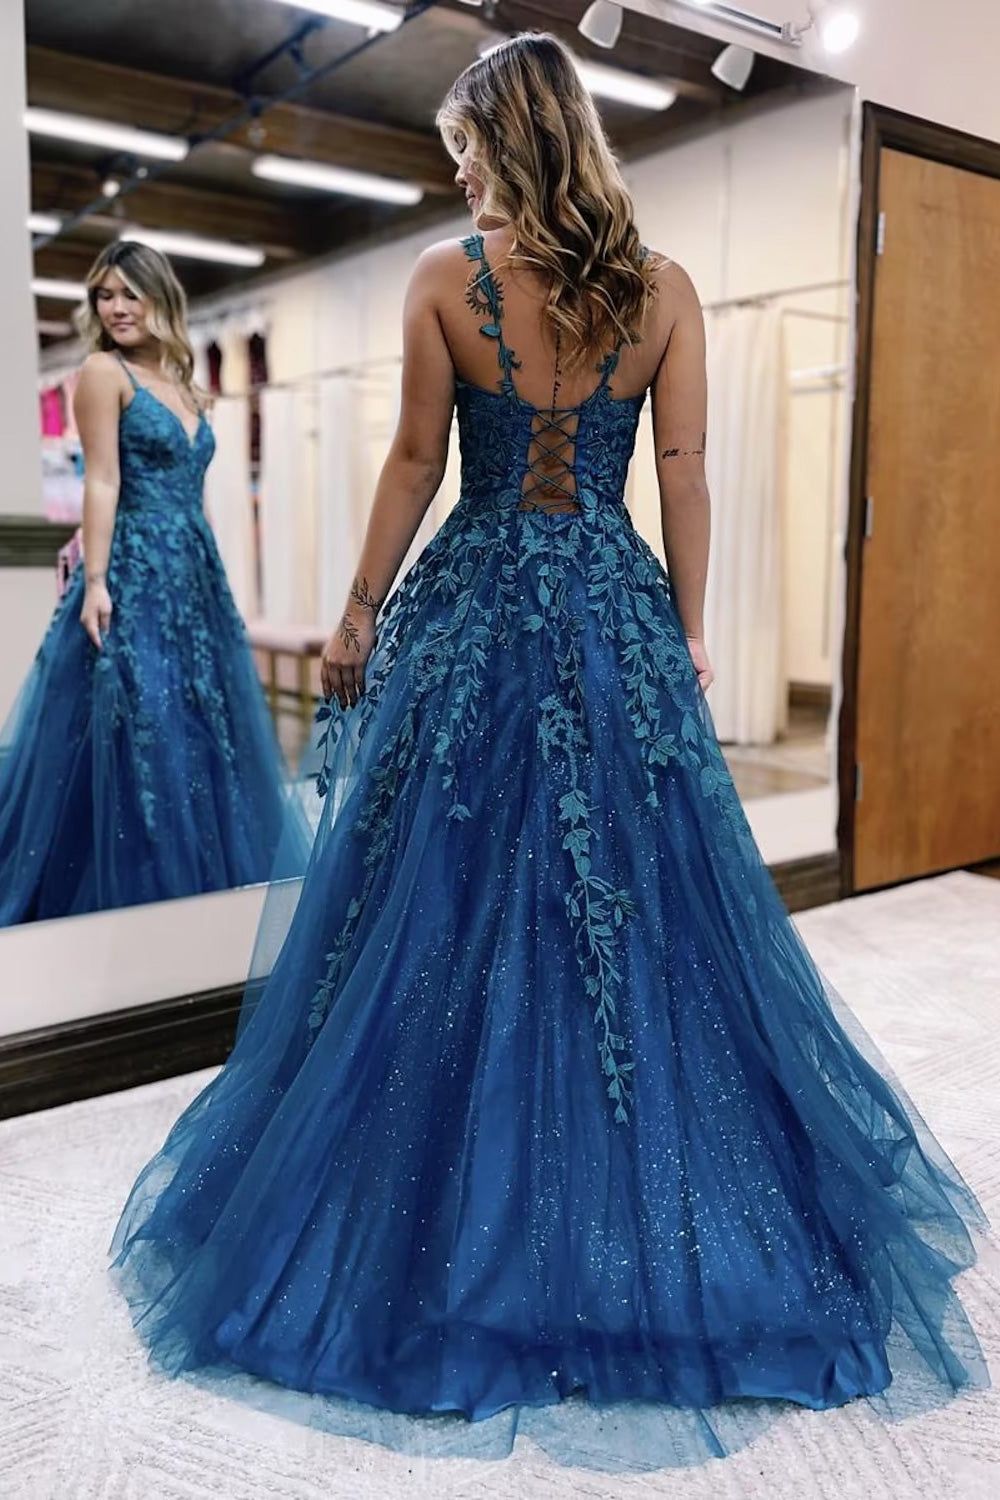 Ball Gown A-Line Prom Dresses Sparkle Shine Dress Formal Floor Length Sleeveless V Neck TulleBackless with Glitter Appliques